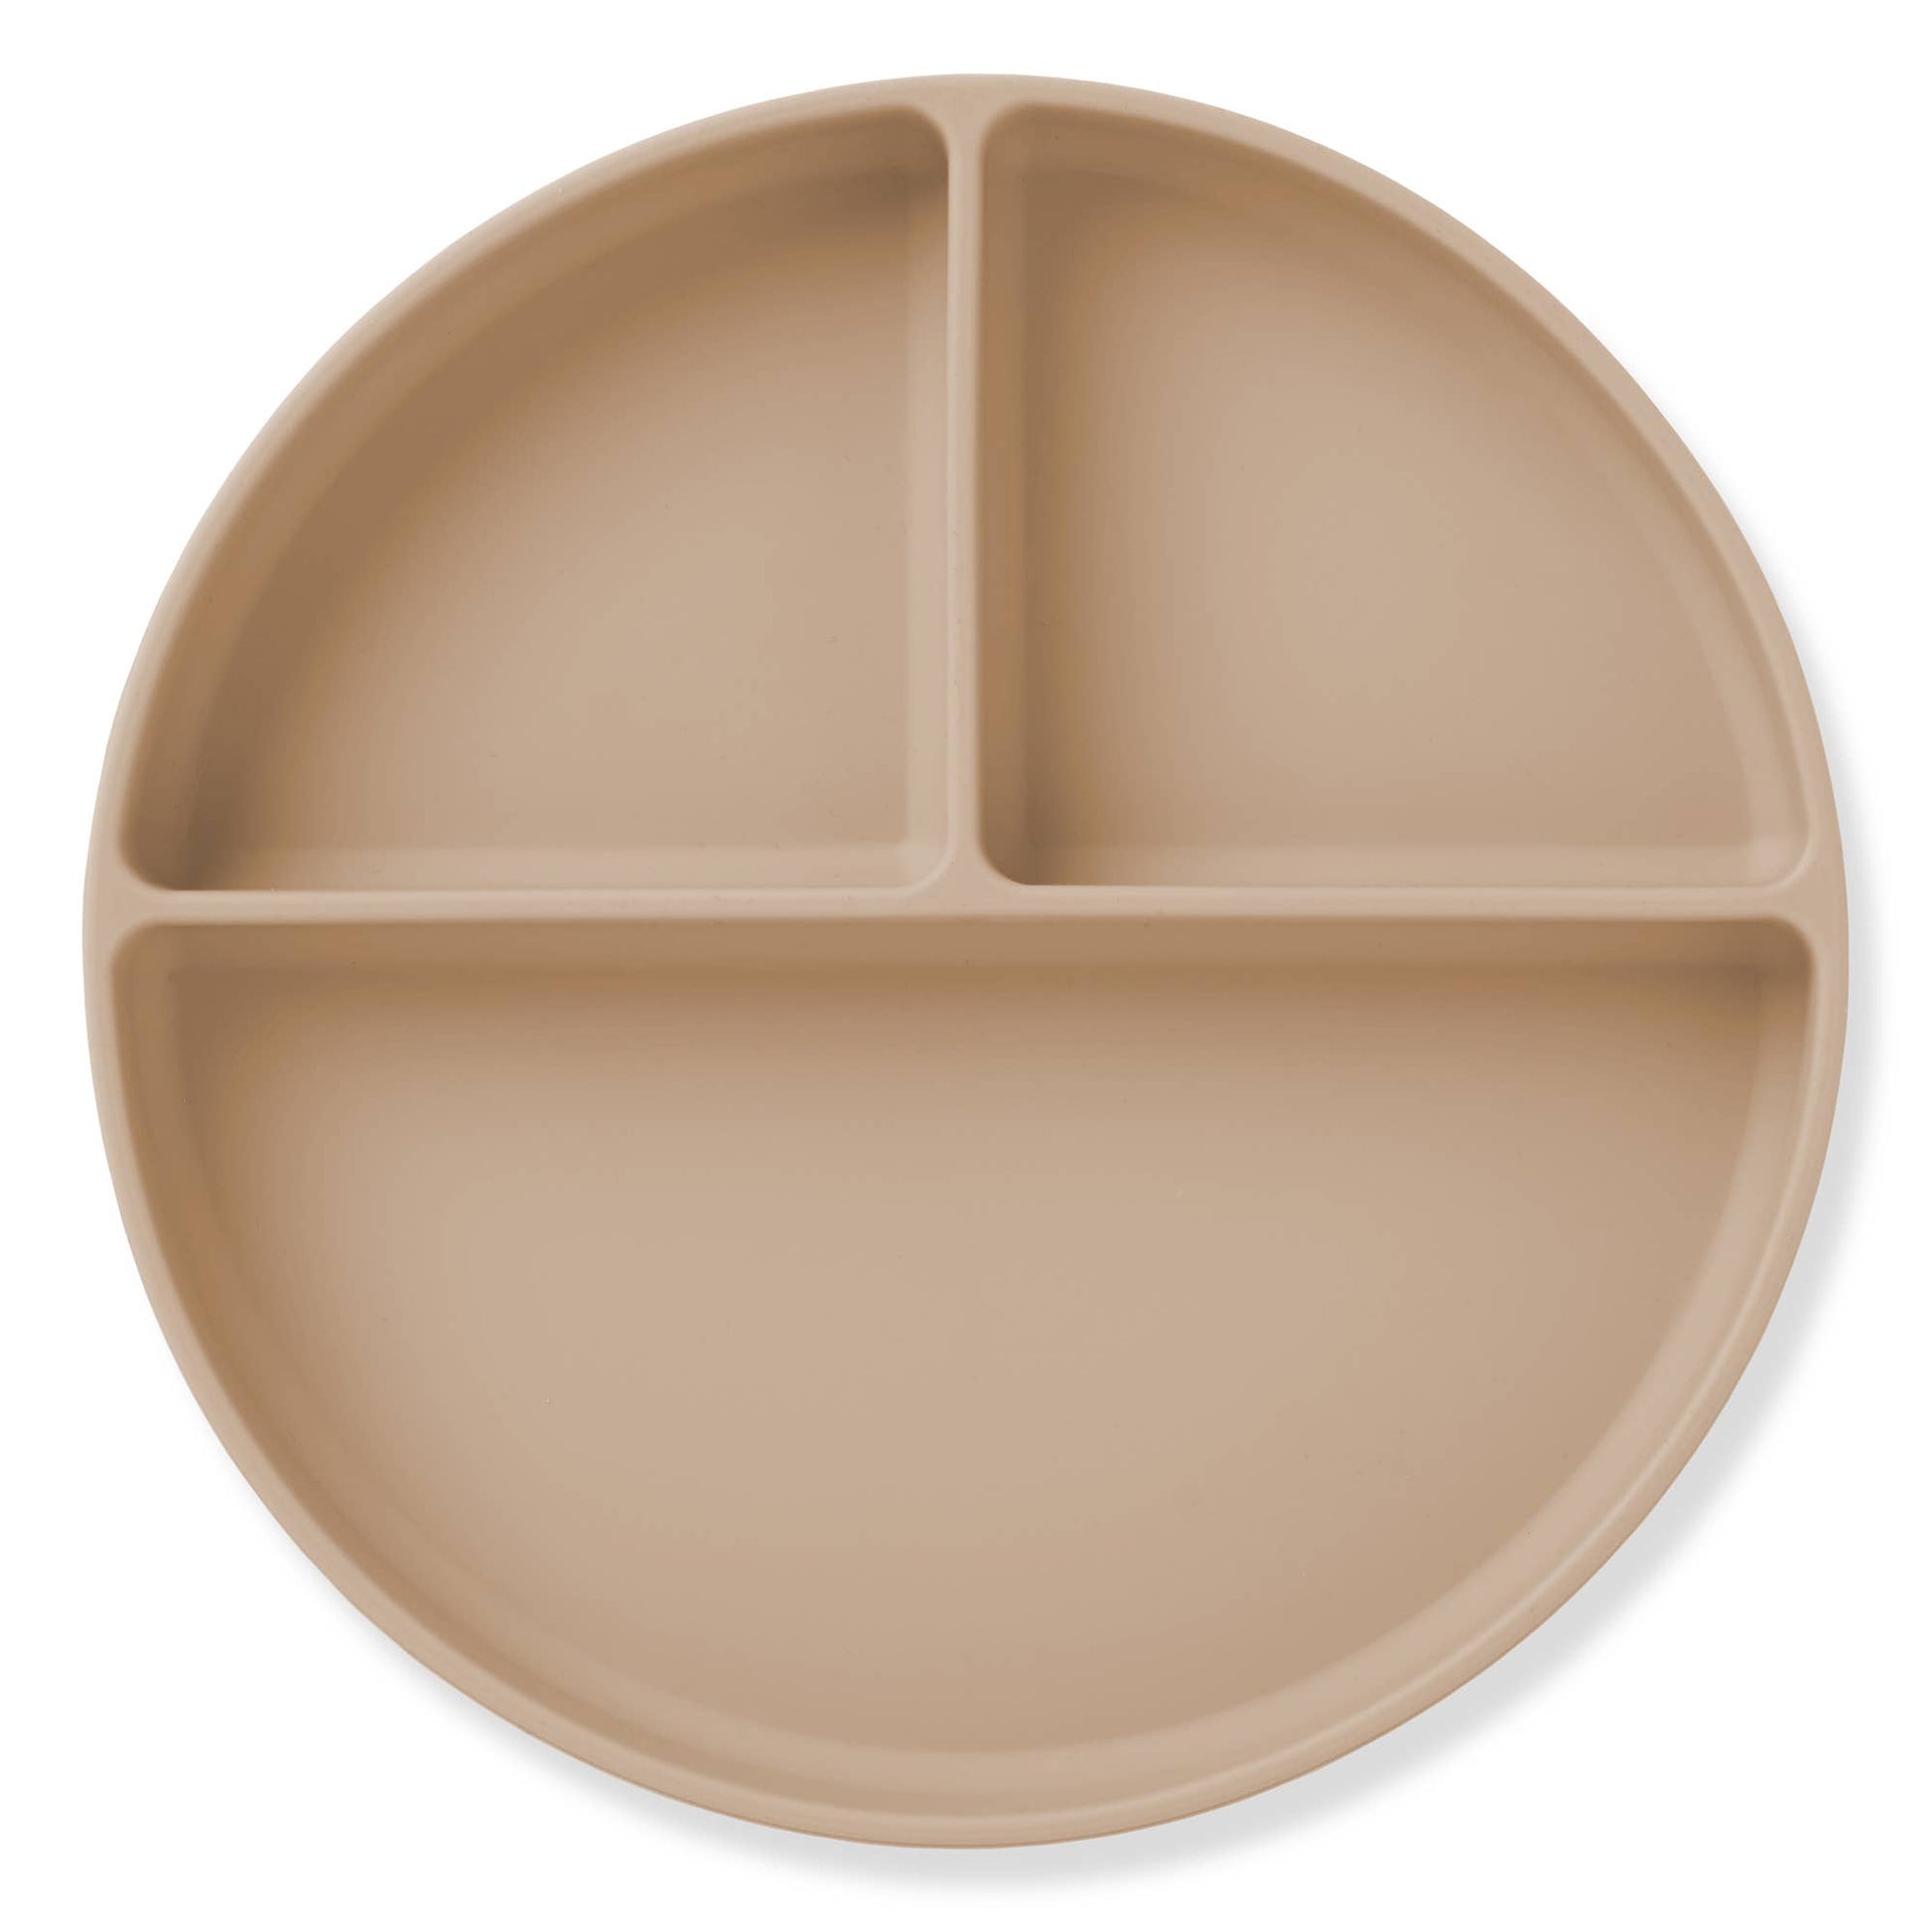 Ali+Oli Baby Plate with Suction and Divided Portions in Oatmeal